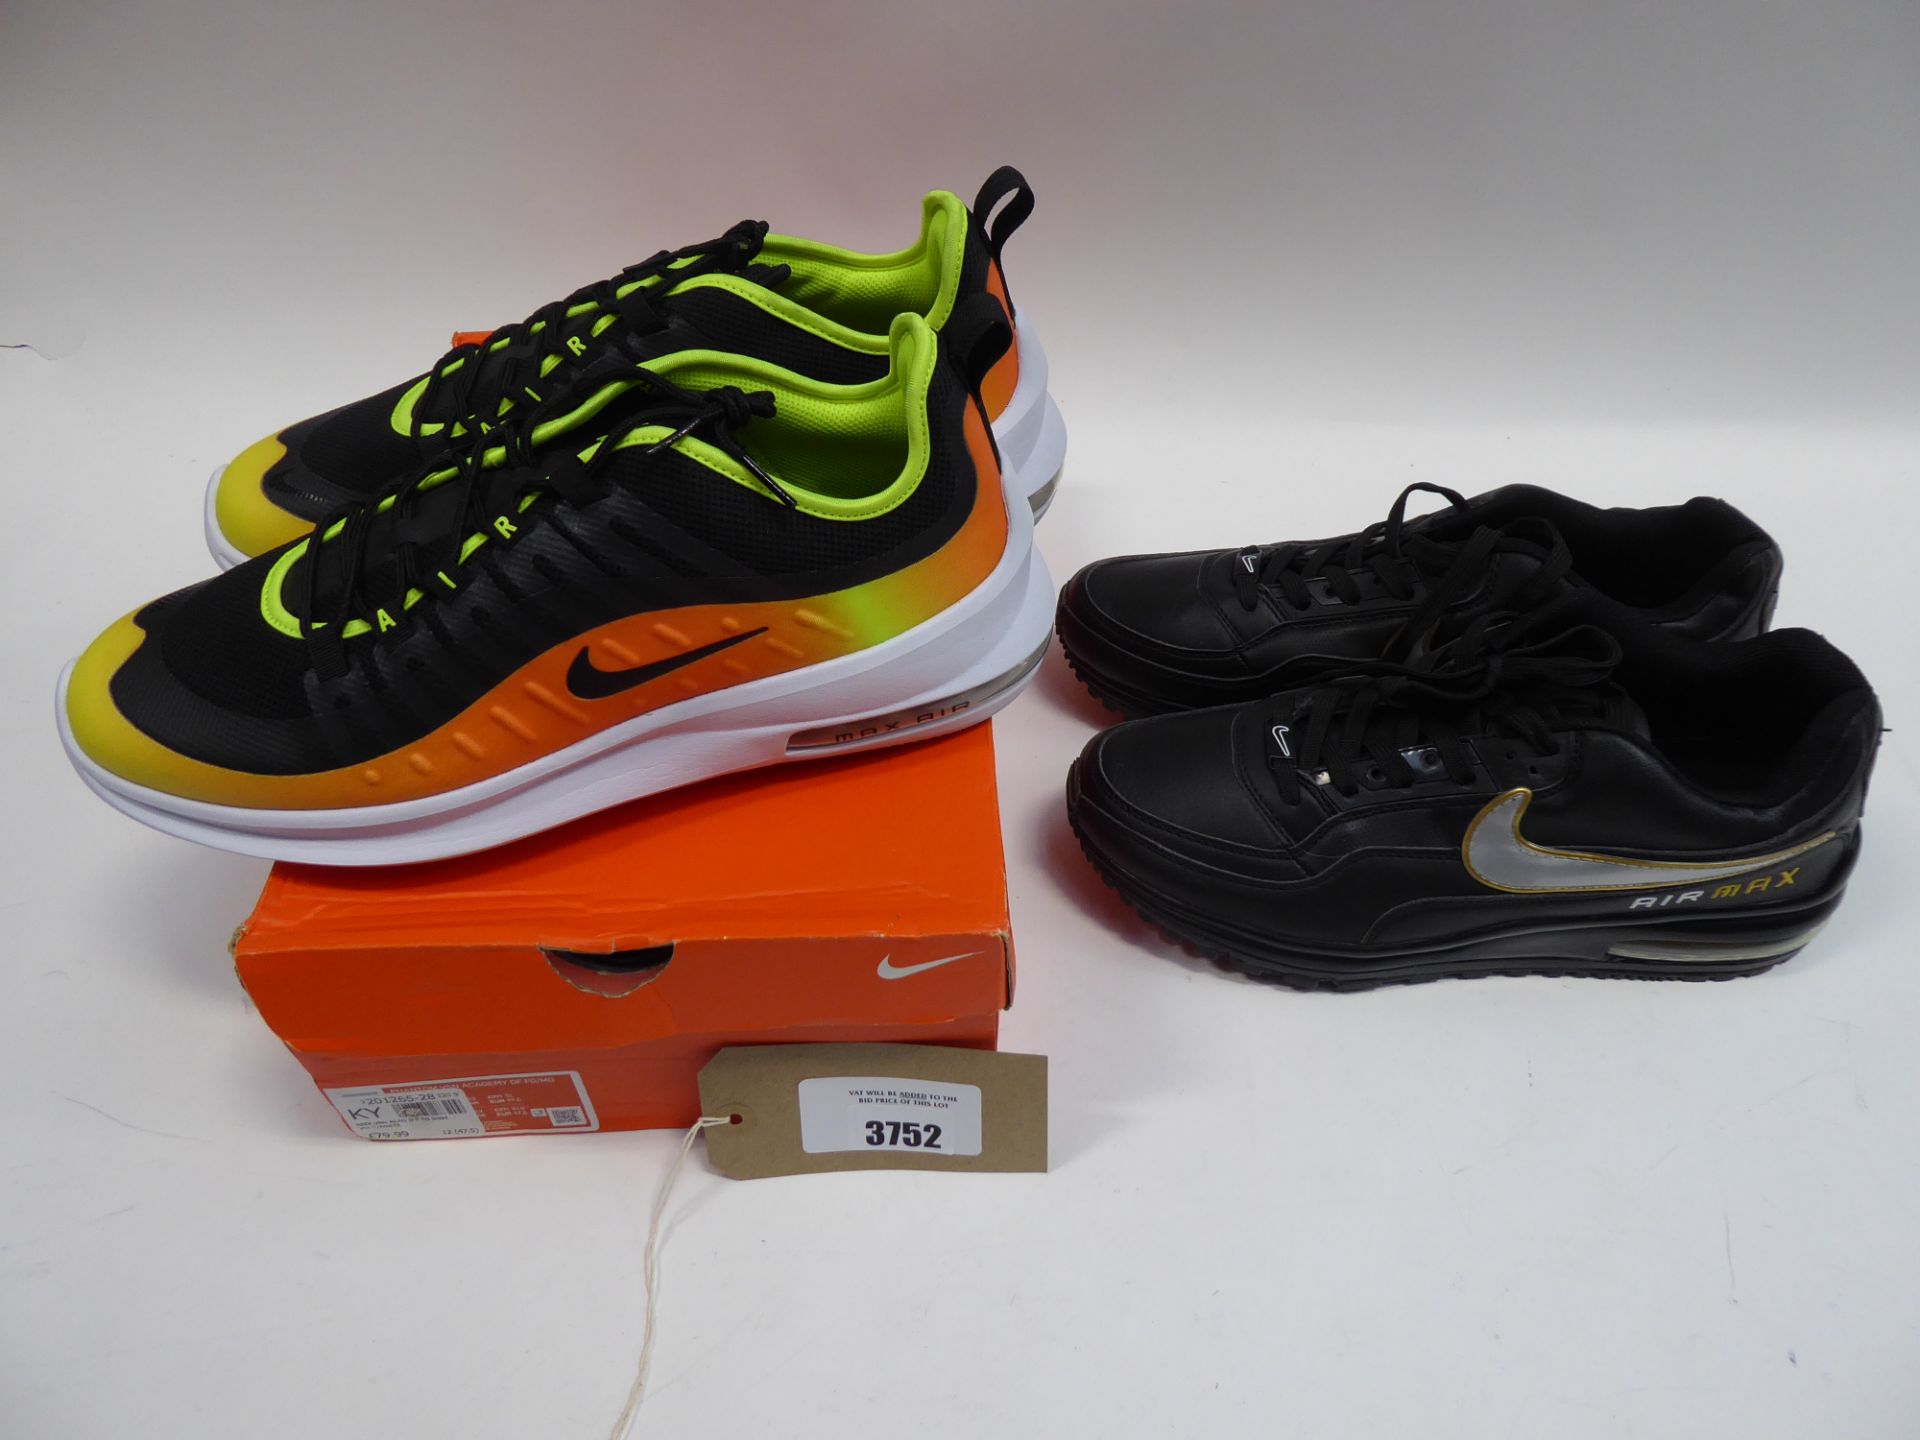 Nike Air Max black and gold 2007 trainers and a pair of Nike Phantom Vision Academy trainers size 11